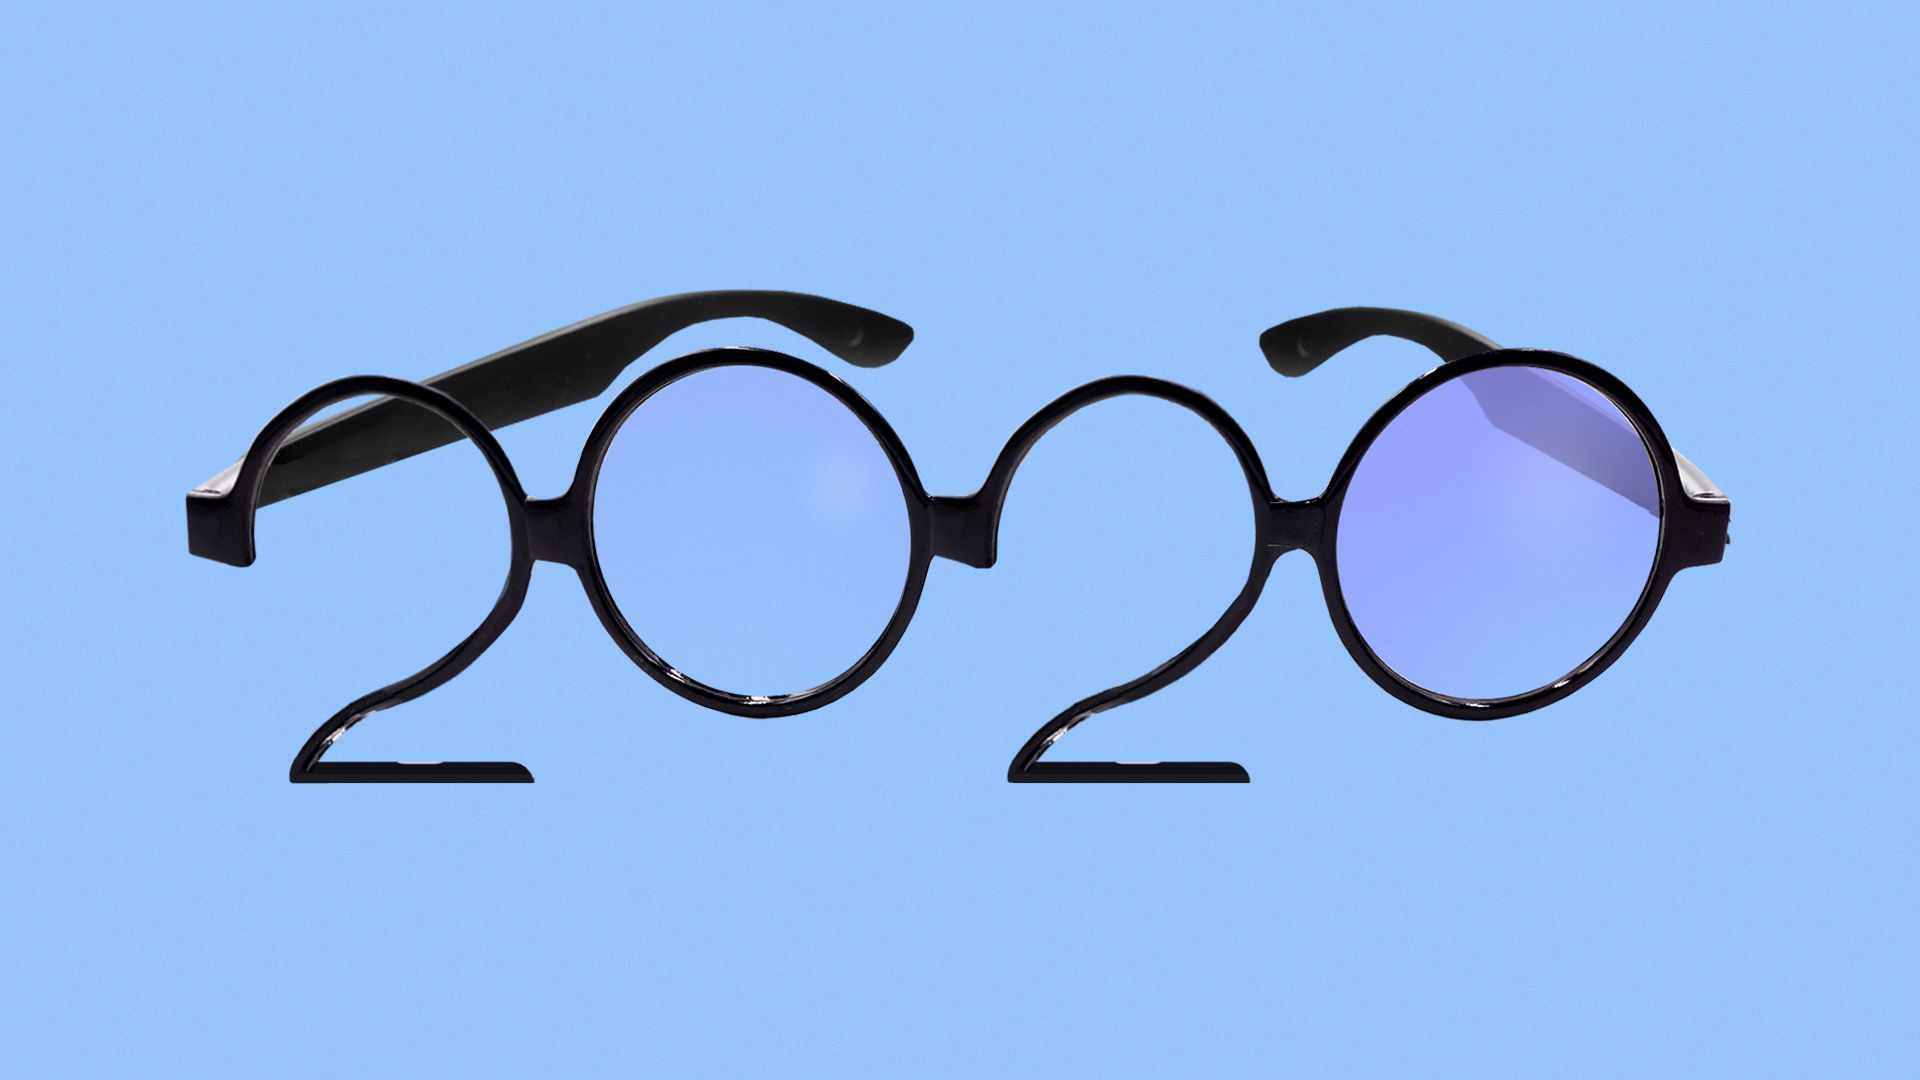 Illustration of glasses forming the shape of 2020